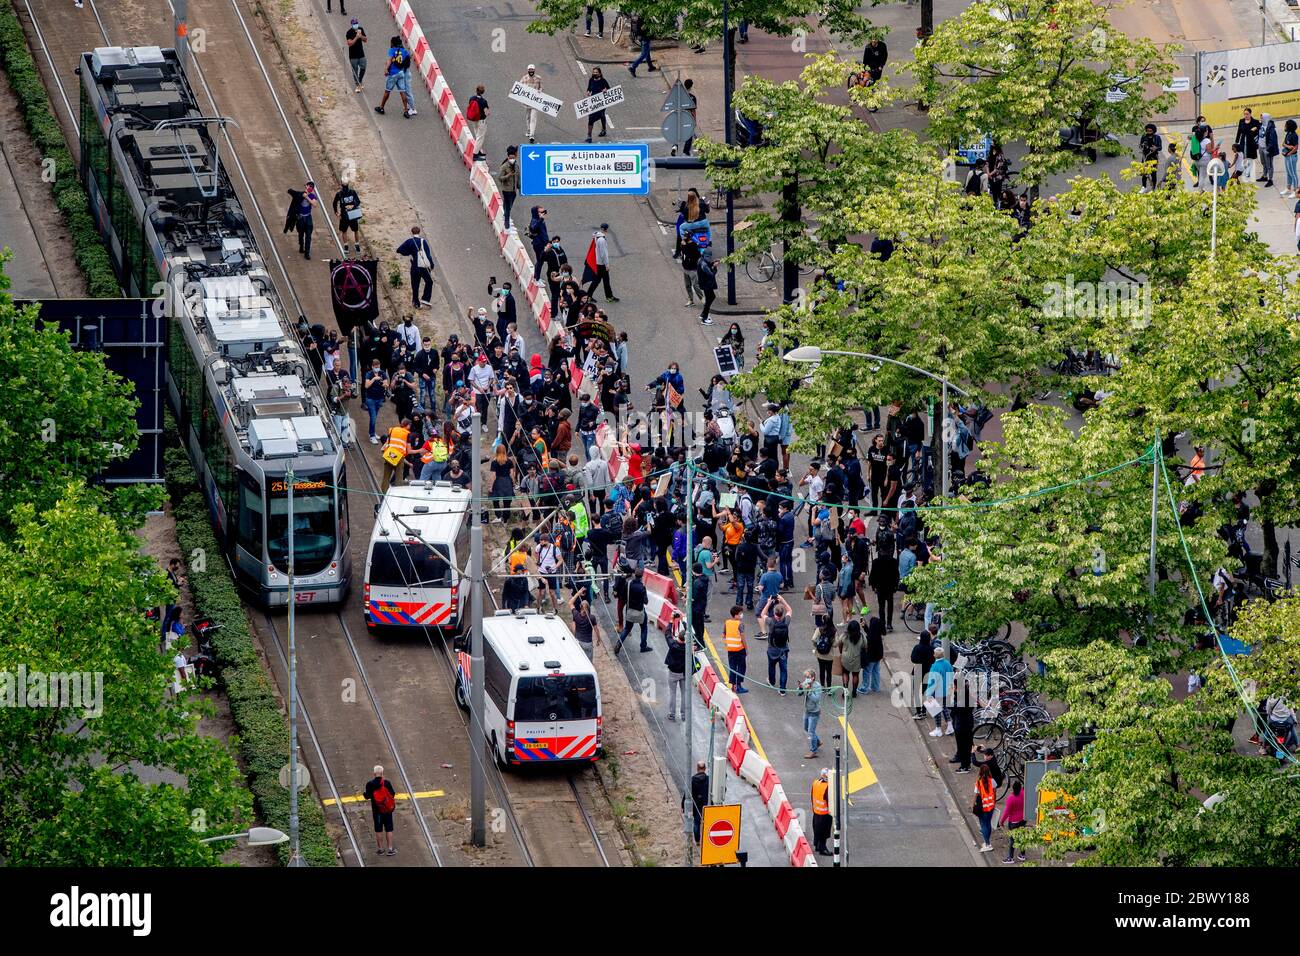 Thousands of people line Erasmus Bridge as they take part in a demonstration to protest against the recent killing of George Floyd, police violence and institutionalized racism. Floyd, a black man, died in police custody in Minneapolis, U.S.A., after being restrained by police officers on May 25, 2020. Stock Photo